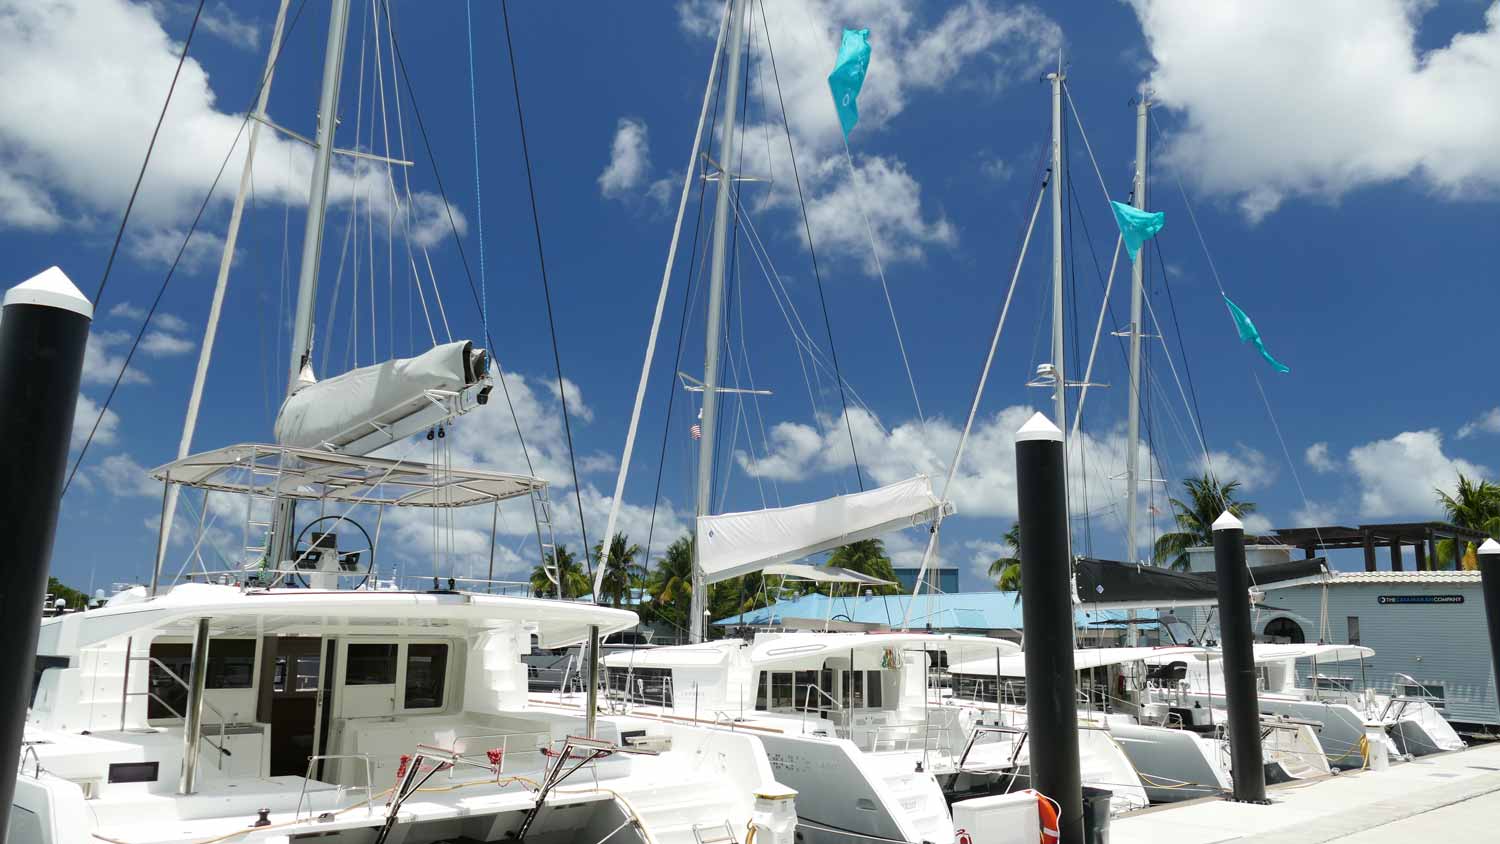 Boats For Sale on Catamaran Row at Lauderdale Marine Center